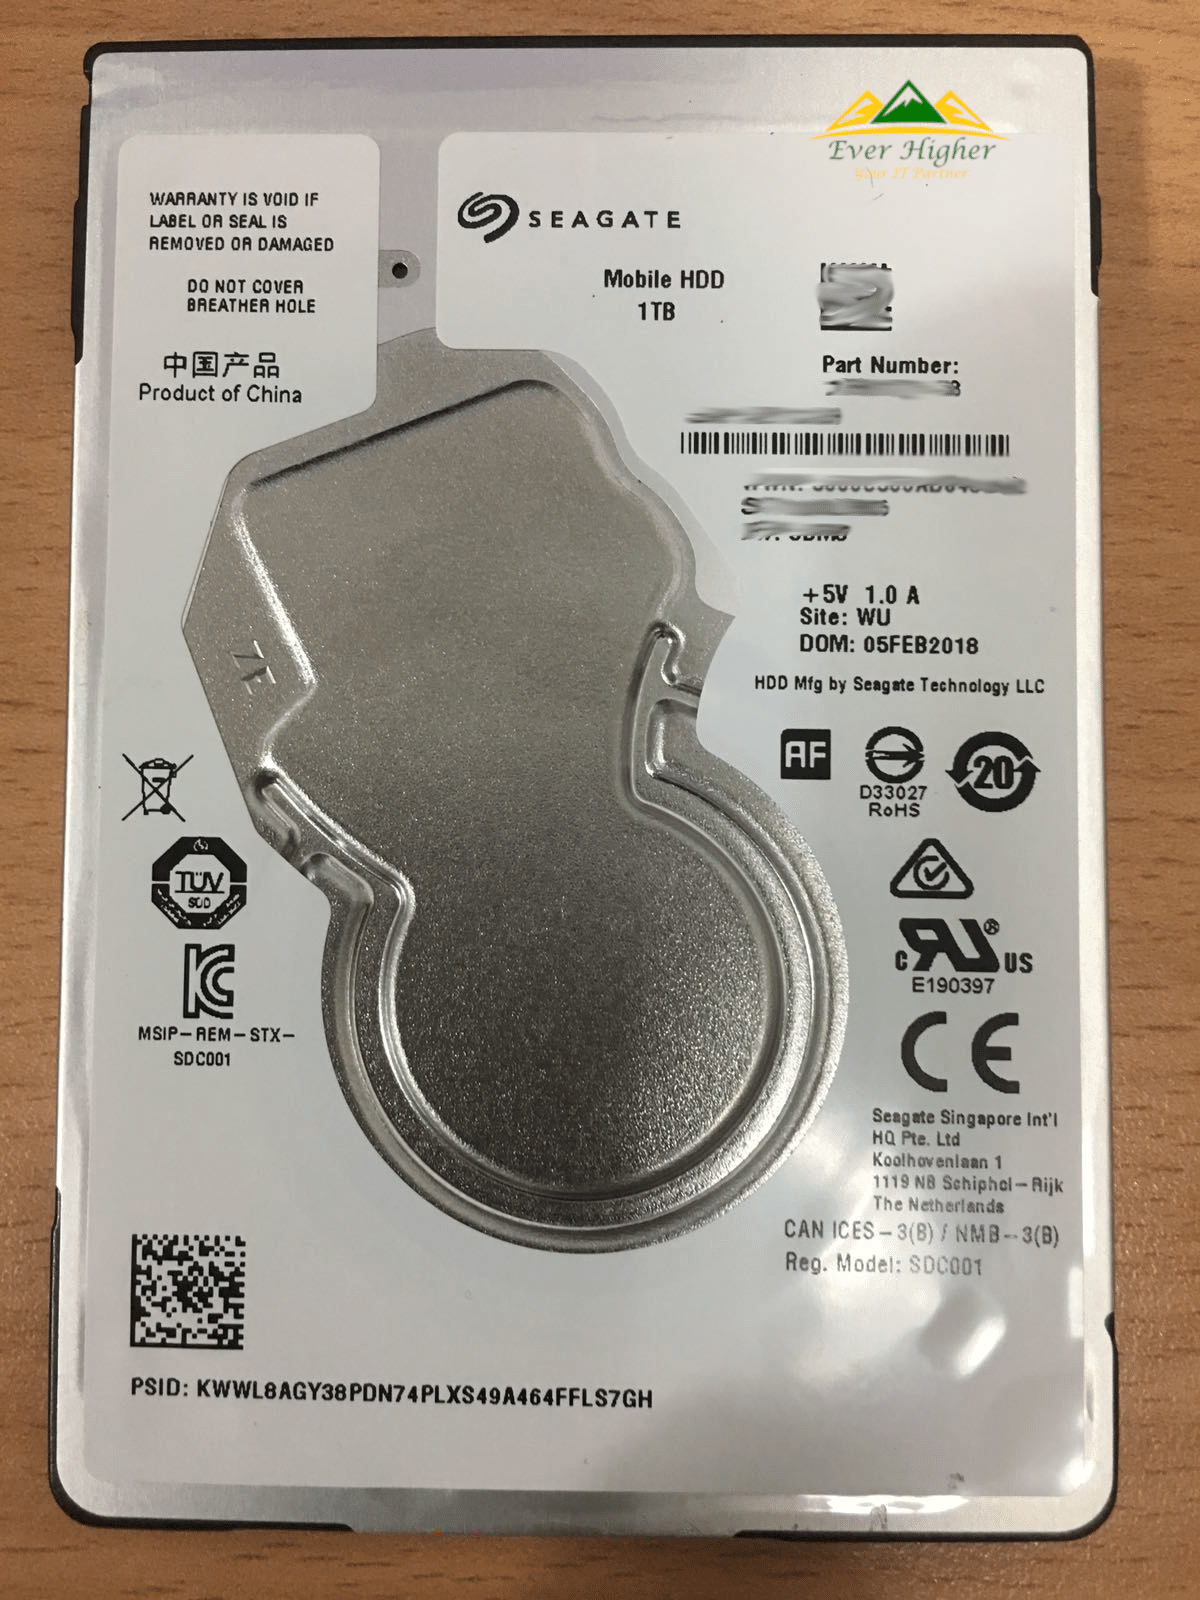 Seagate 1TB Harddisk Data Recovery Service